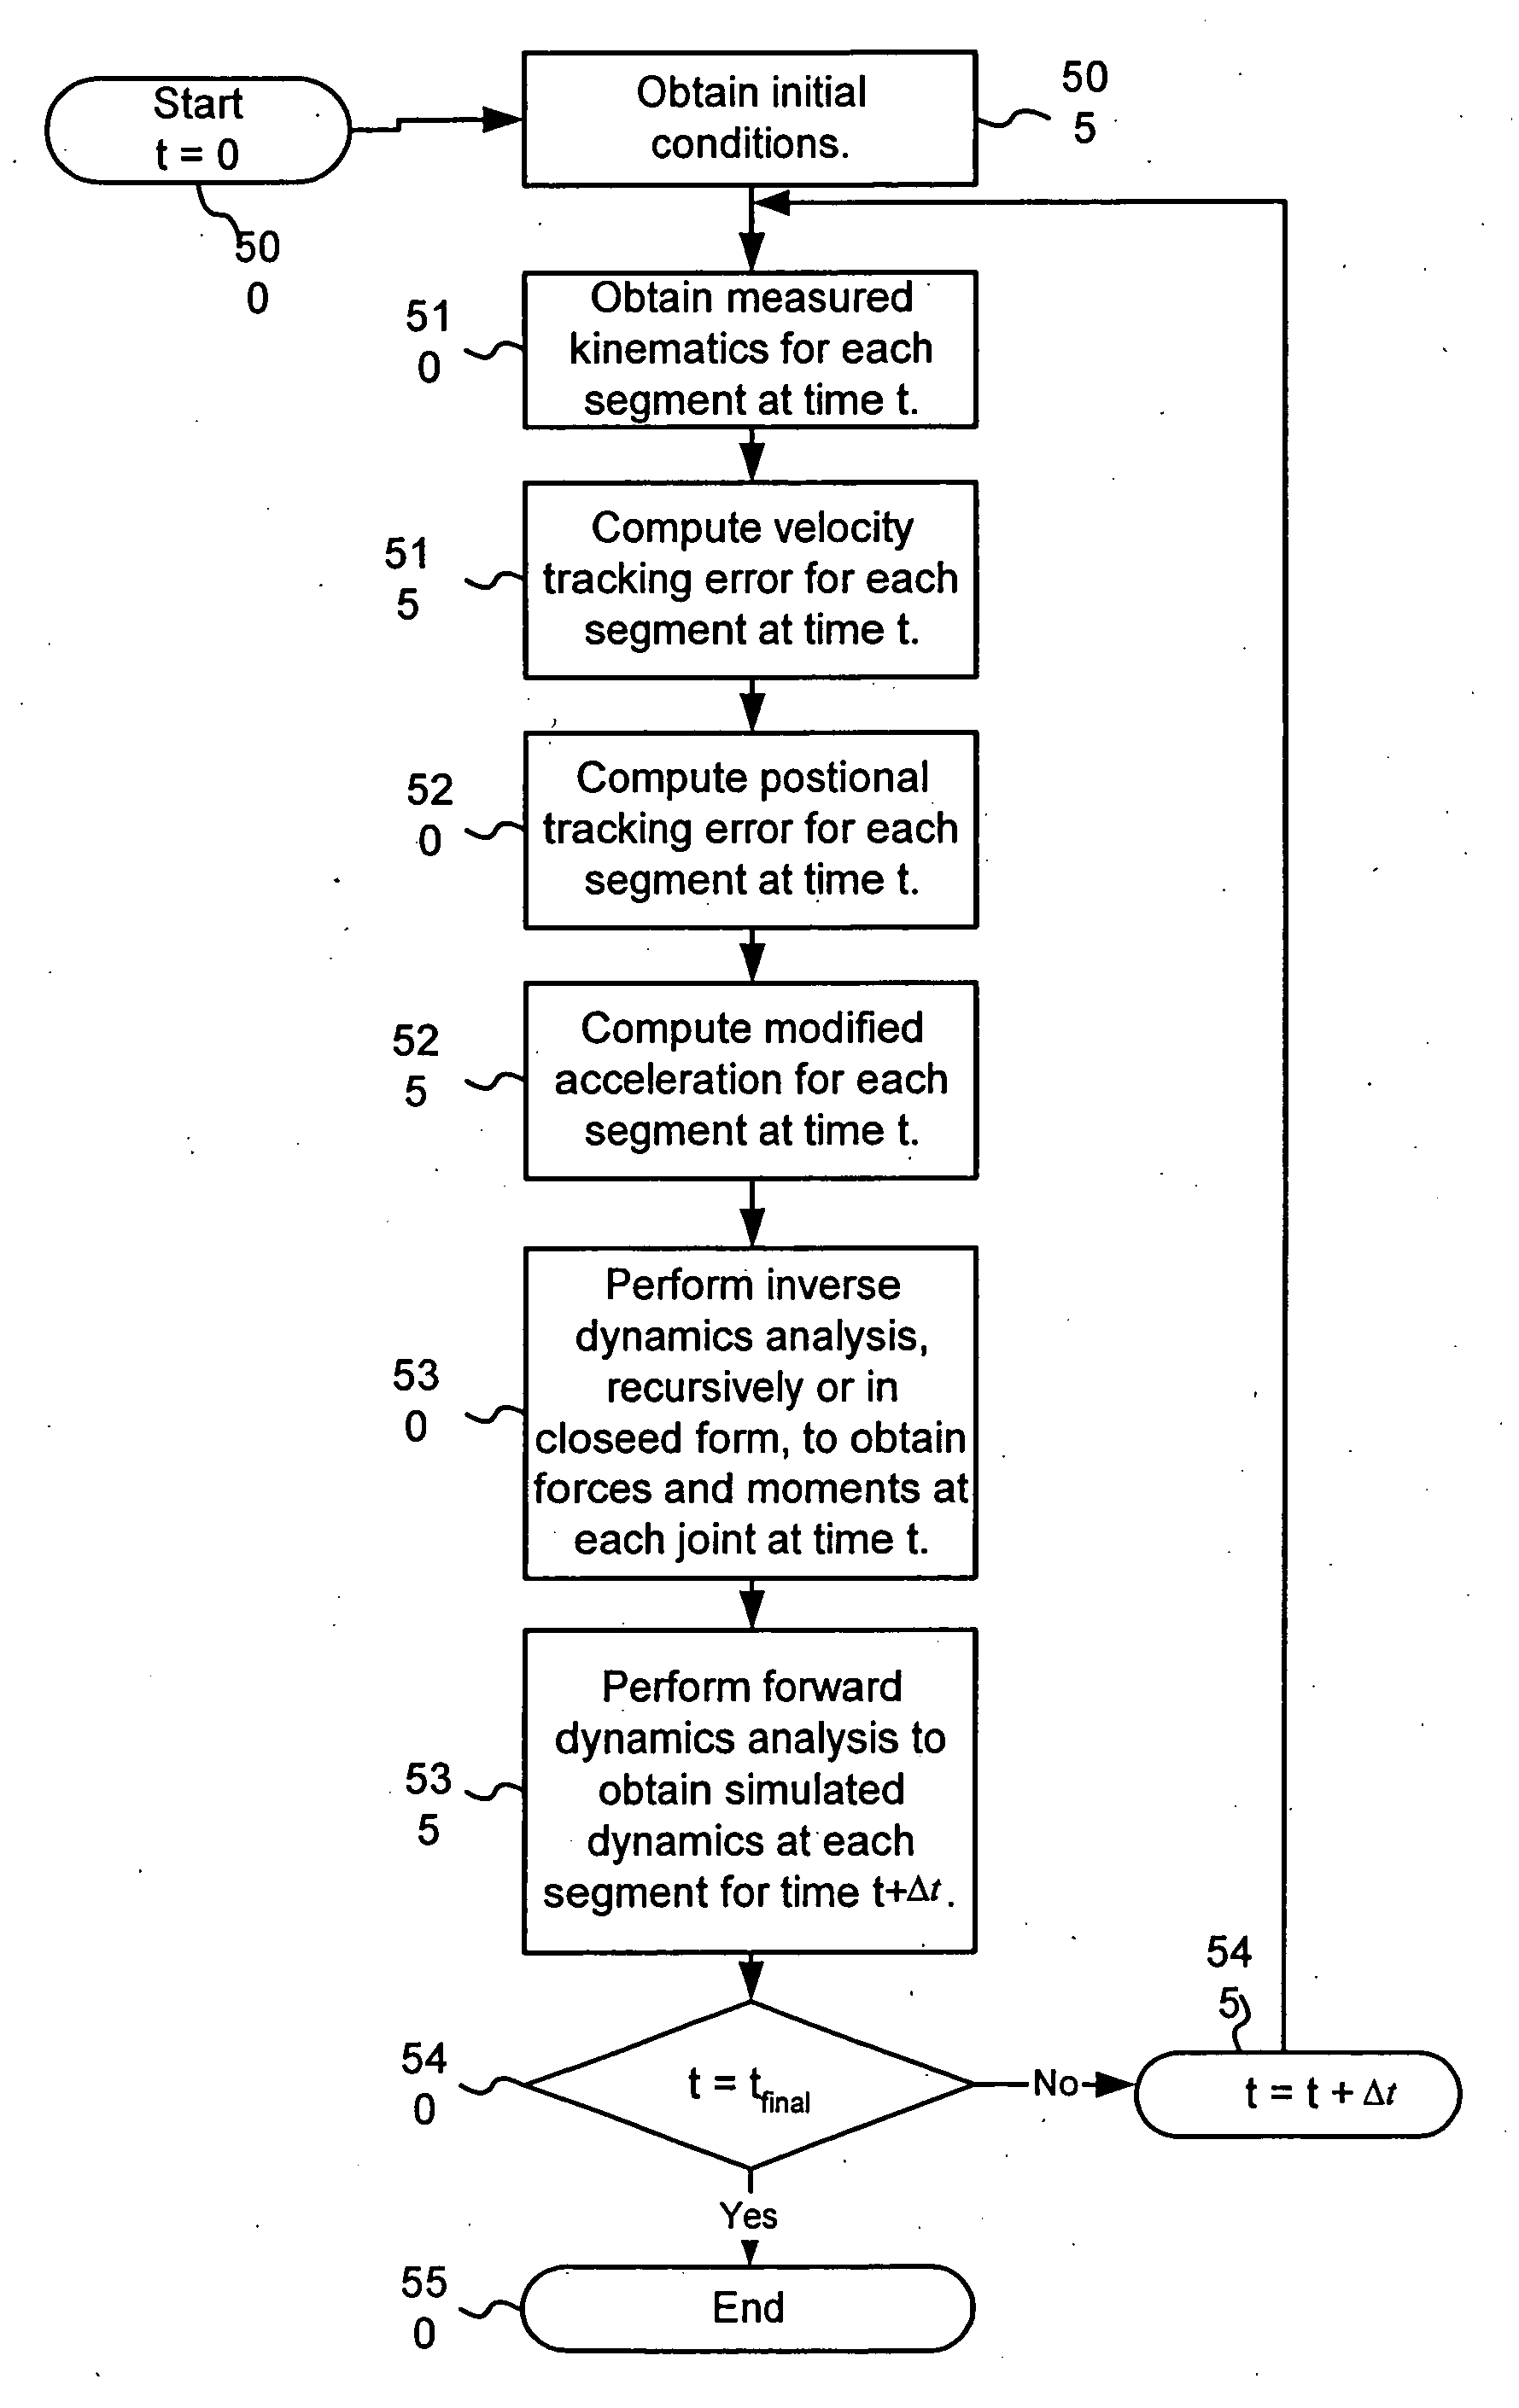 System and method of predicting novel motion in a serial chain system